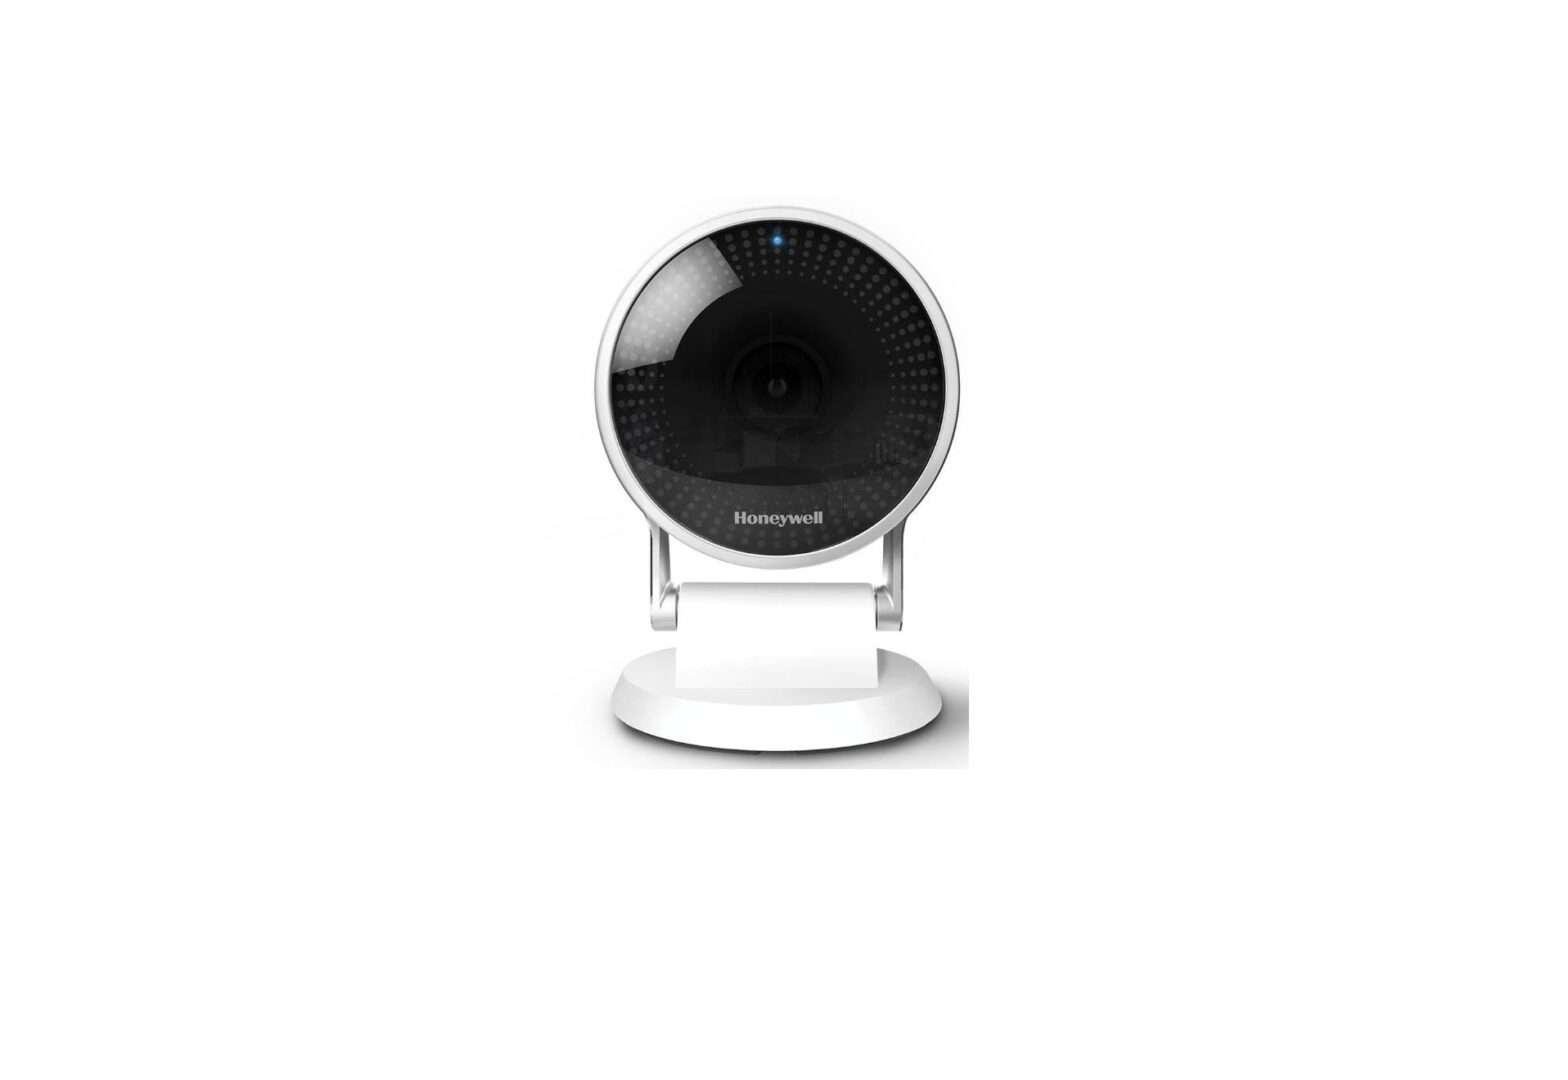 Honeywell home C2 WIFI SECURITY CAMERA User Manual - Featured image